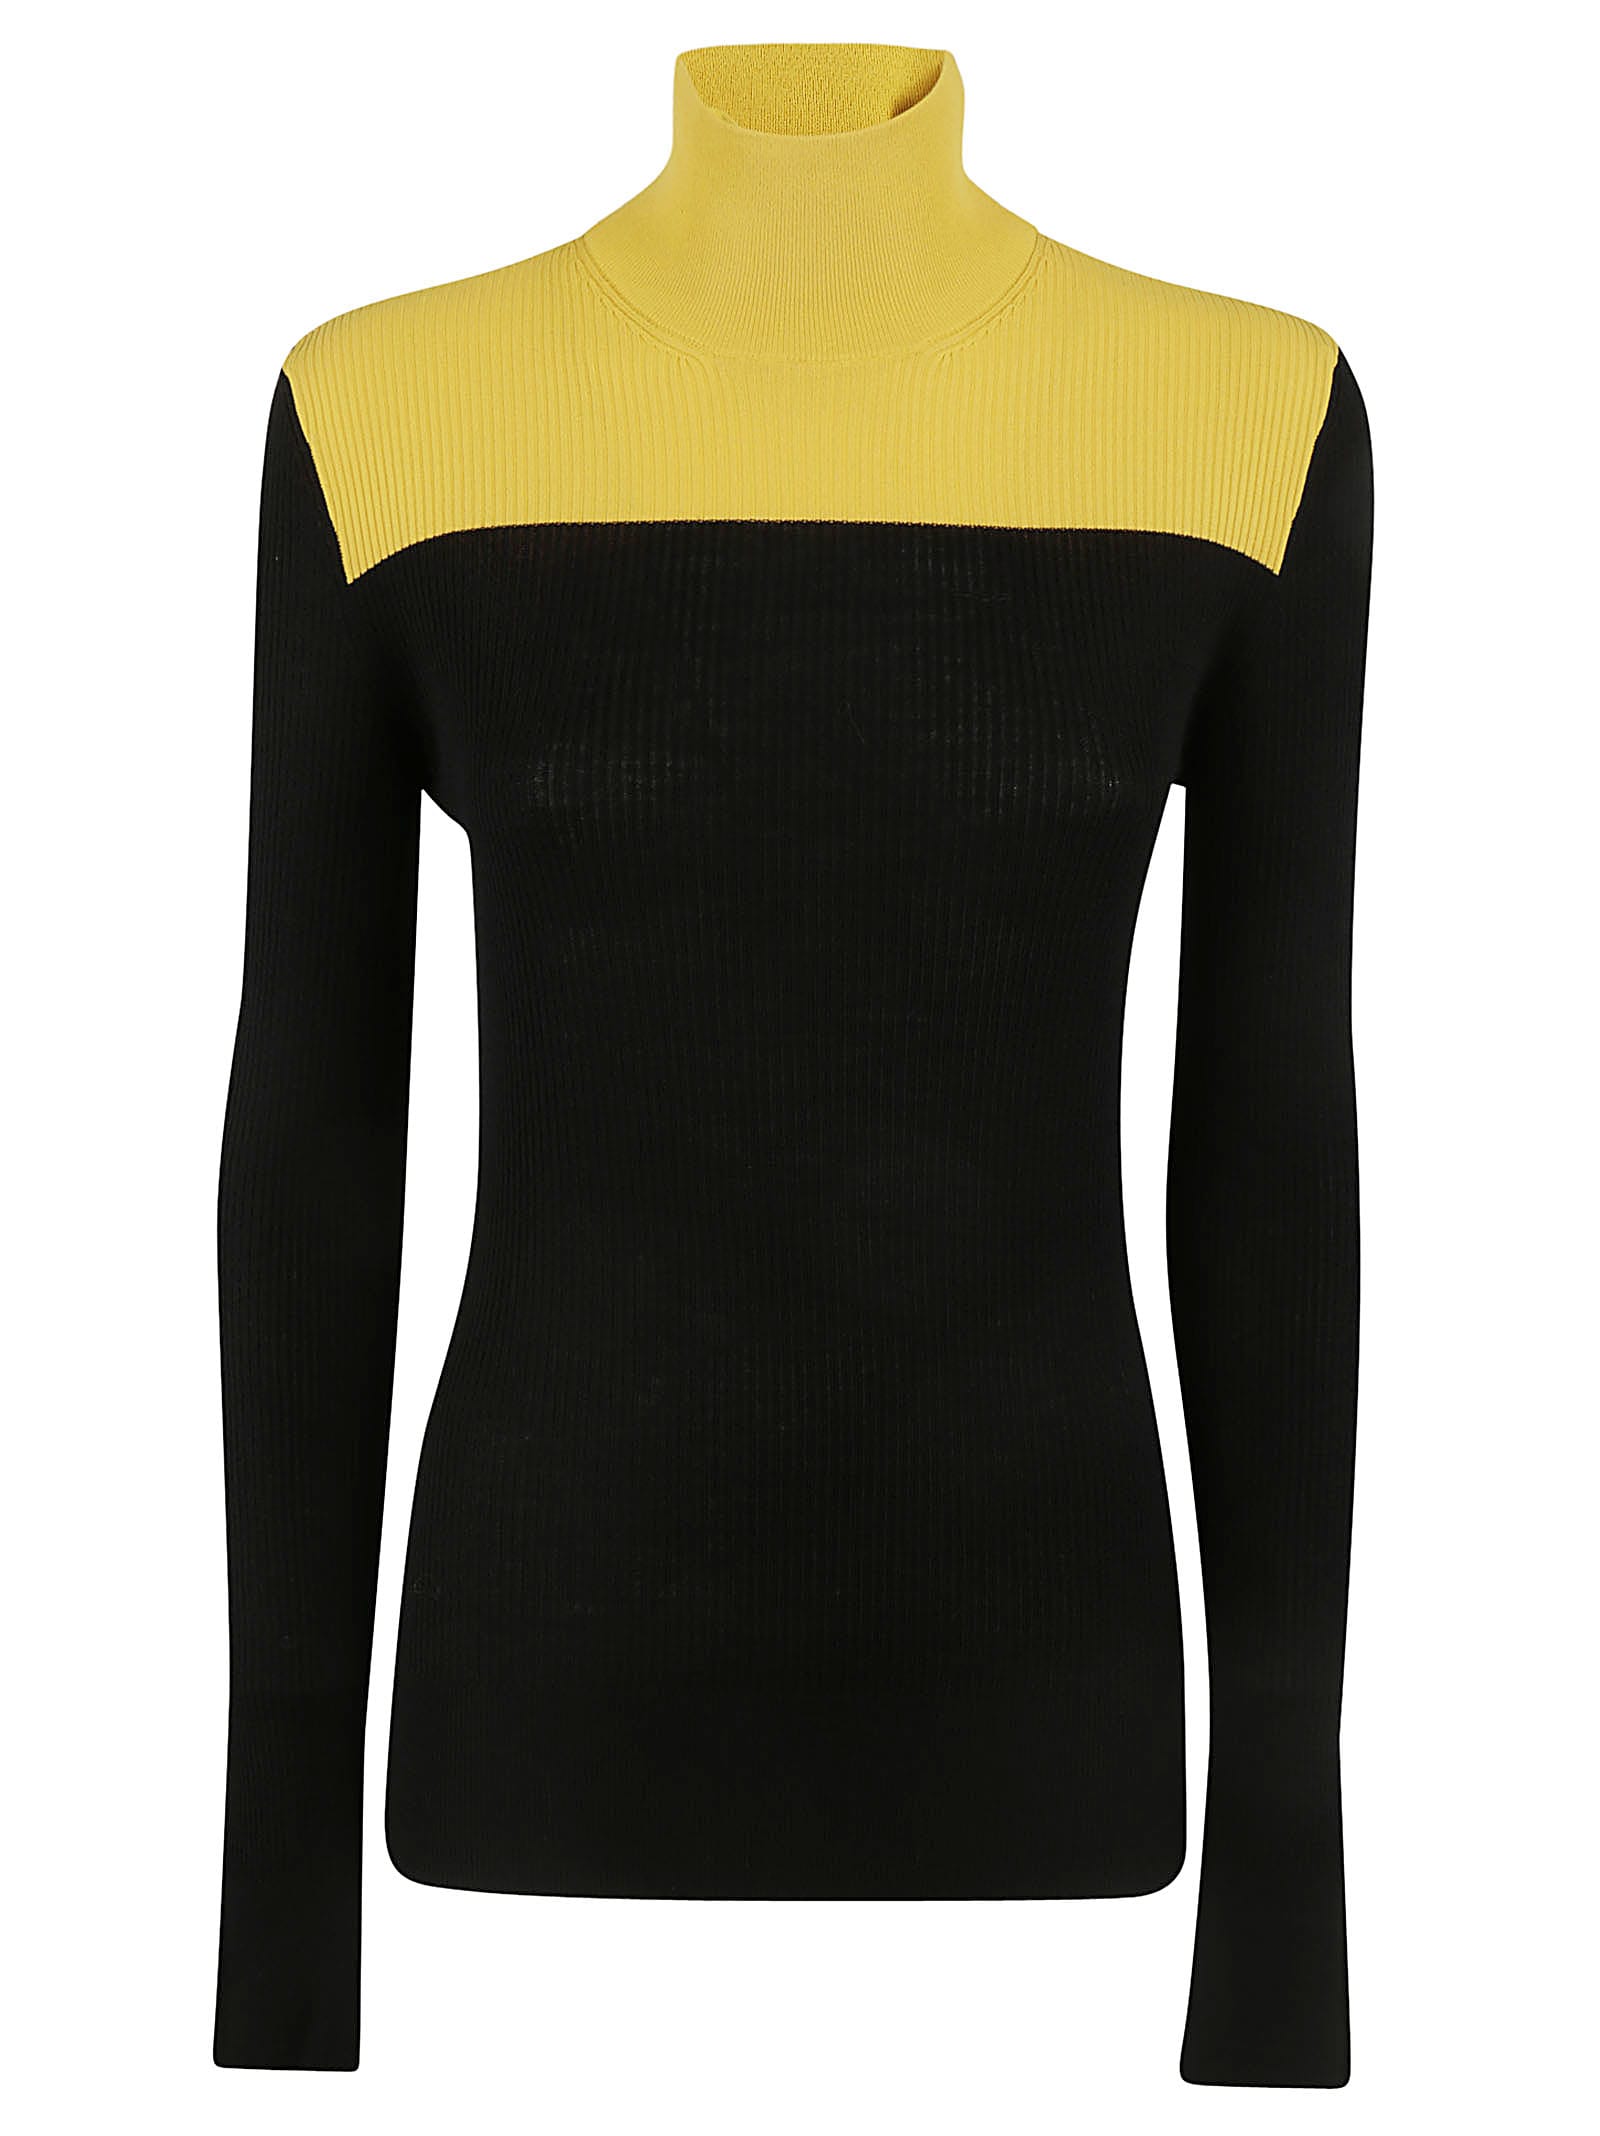 black and yellow sweater